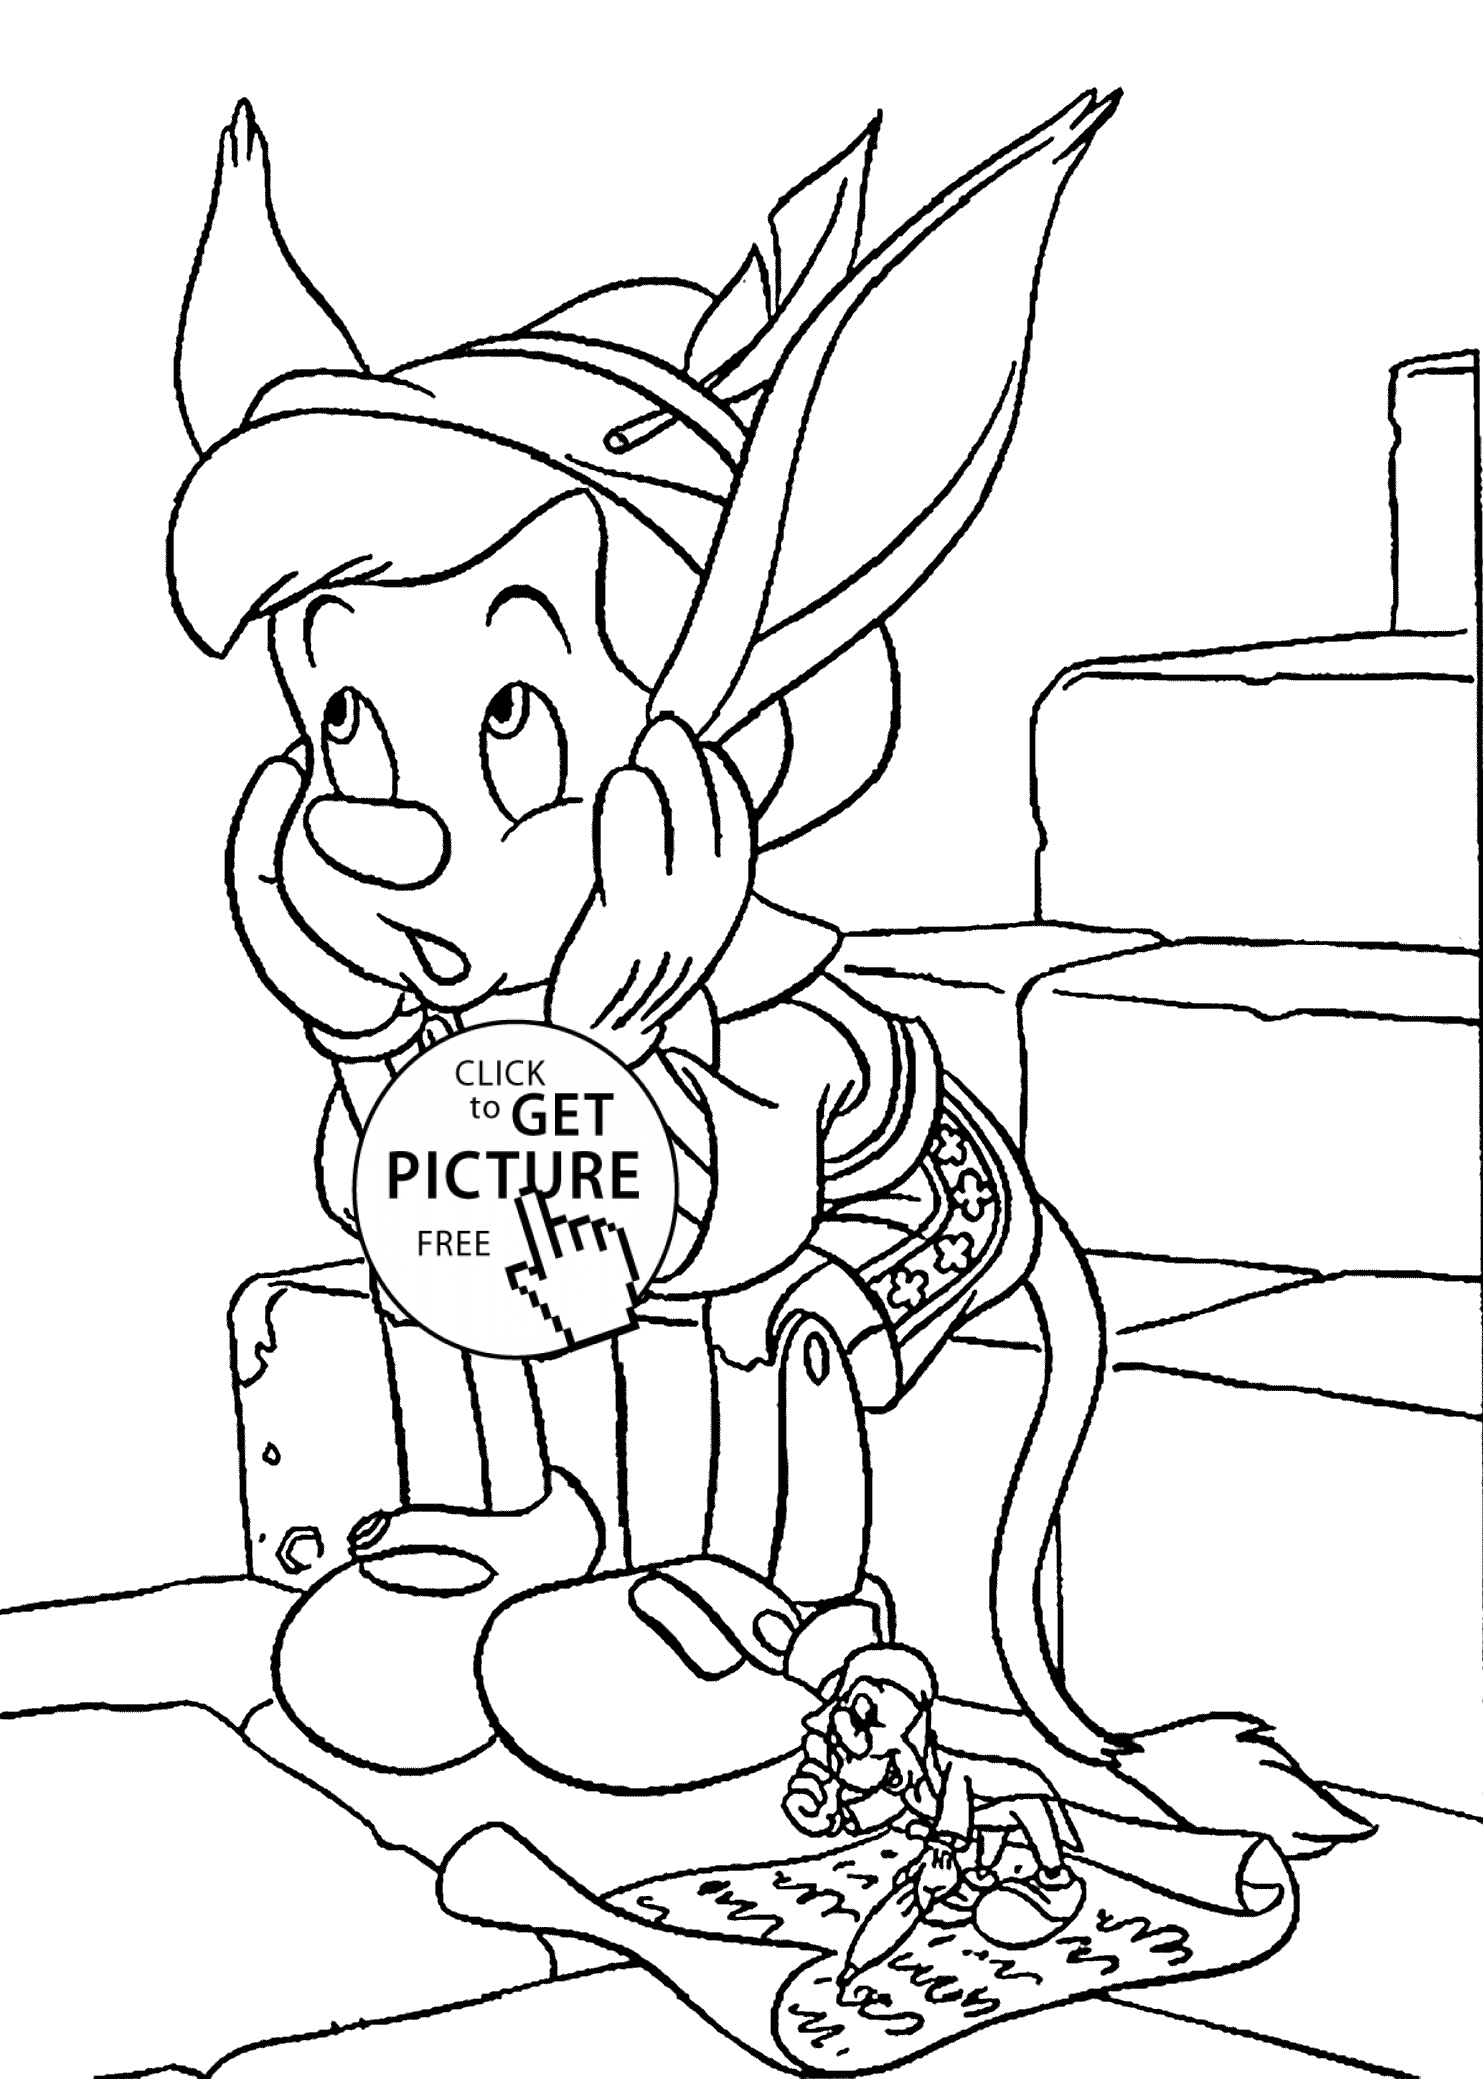 Pinocchio Coloring Page Funny Pinocchio Cartoon Coloring Pages For Kids Printable Free